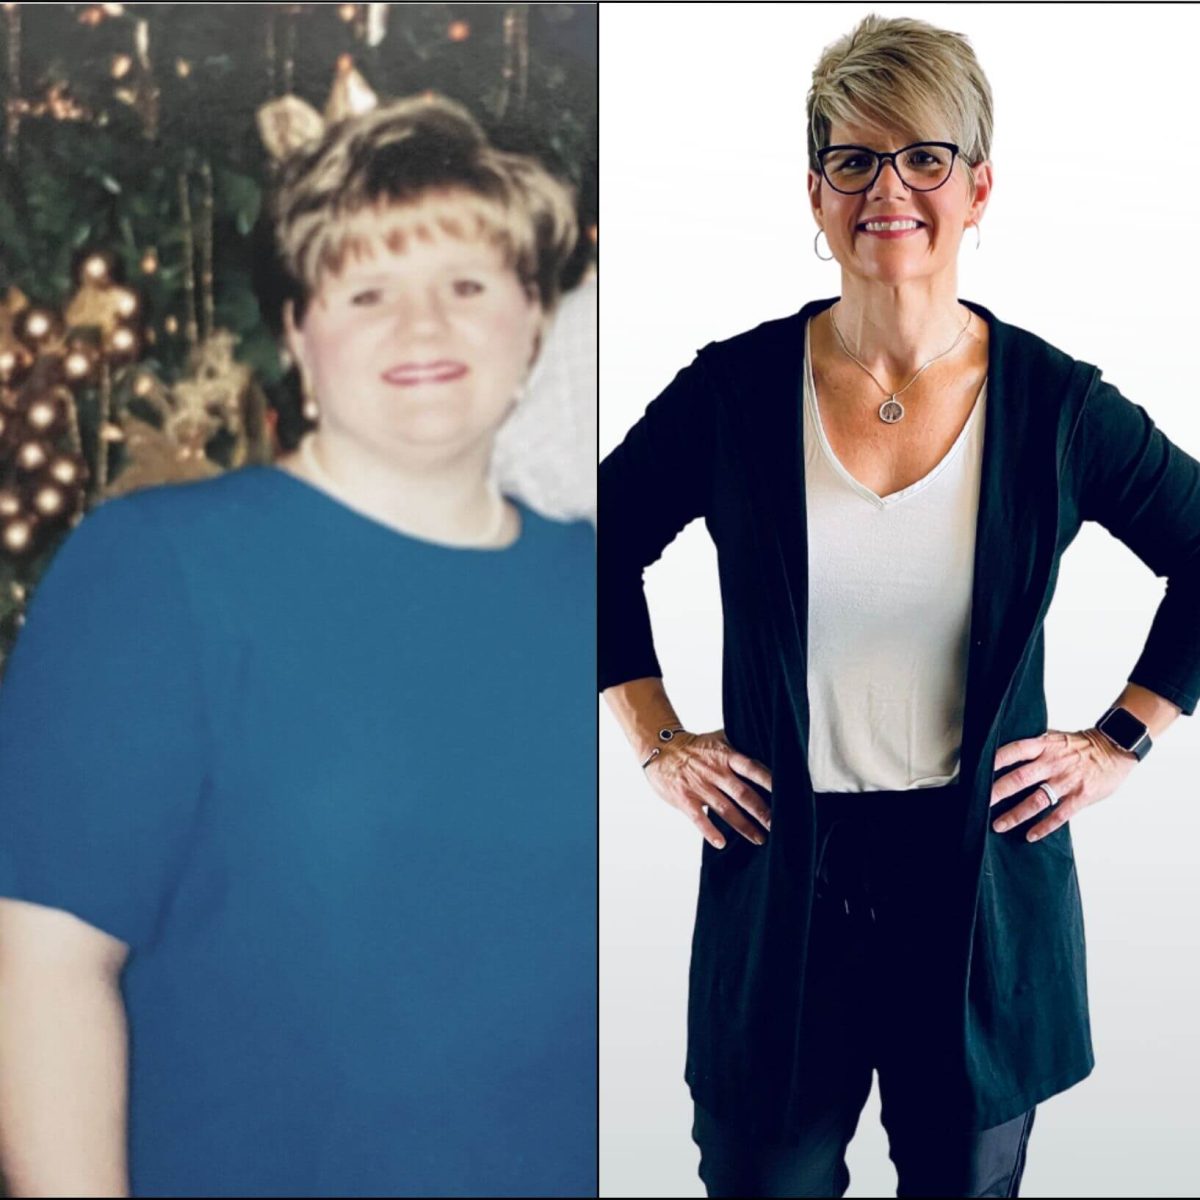 Two pictures of a woman before and after a weight loss program.